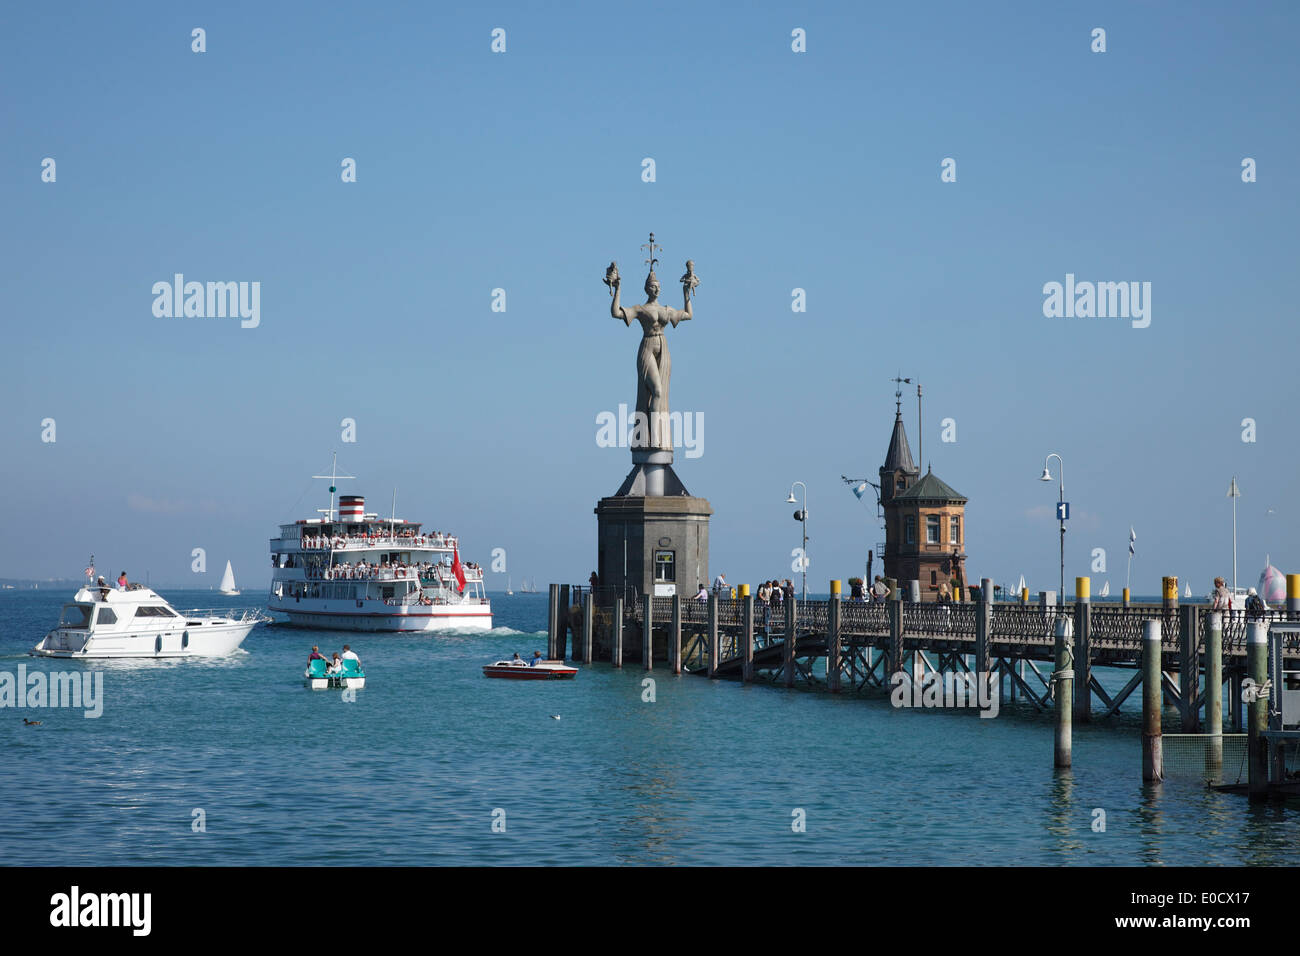 Imperia, Peter Lenk, 15th century, Harbour Constance, Lake of Constance, Baden-Wurttemberg, Germany Stock Photo